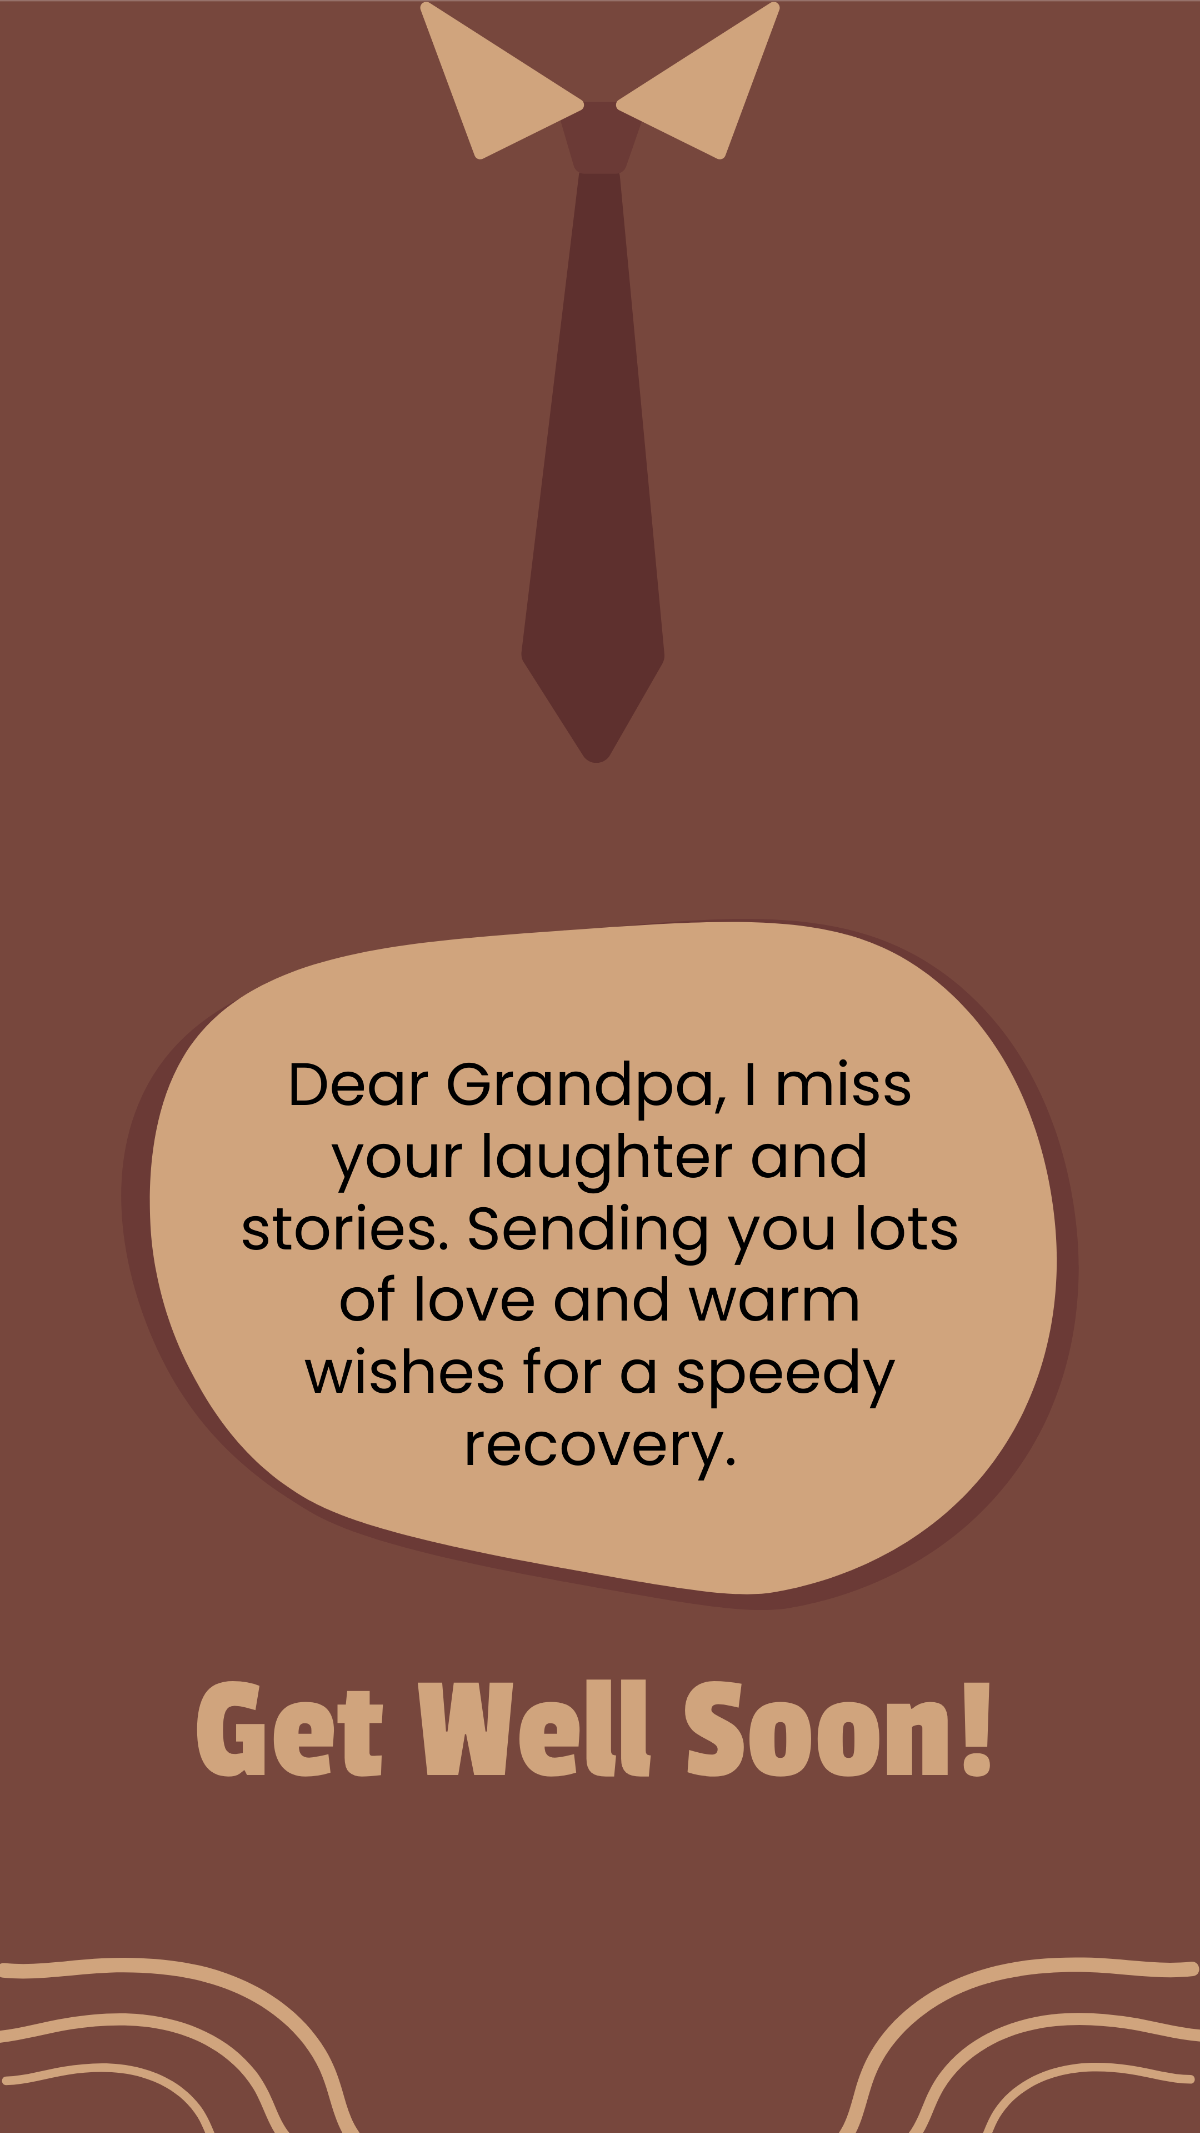 Get Well Soon Message For Grandfather